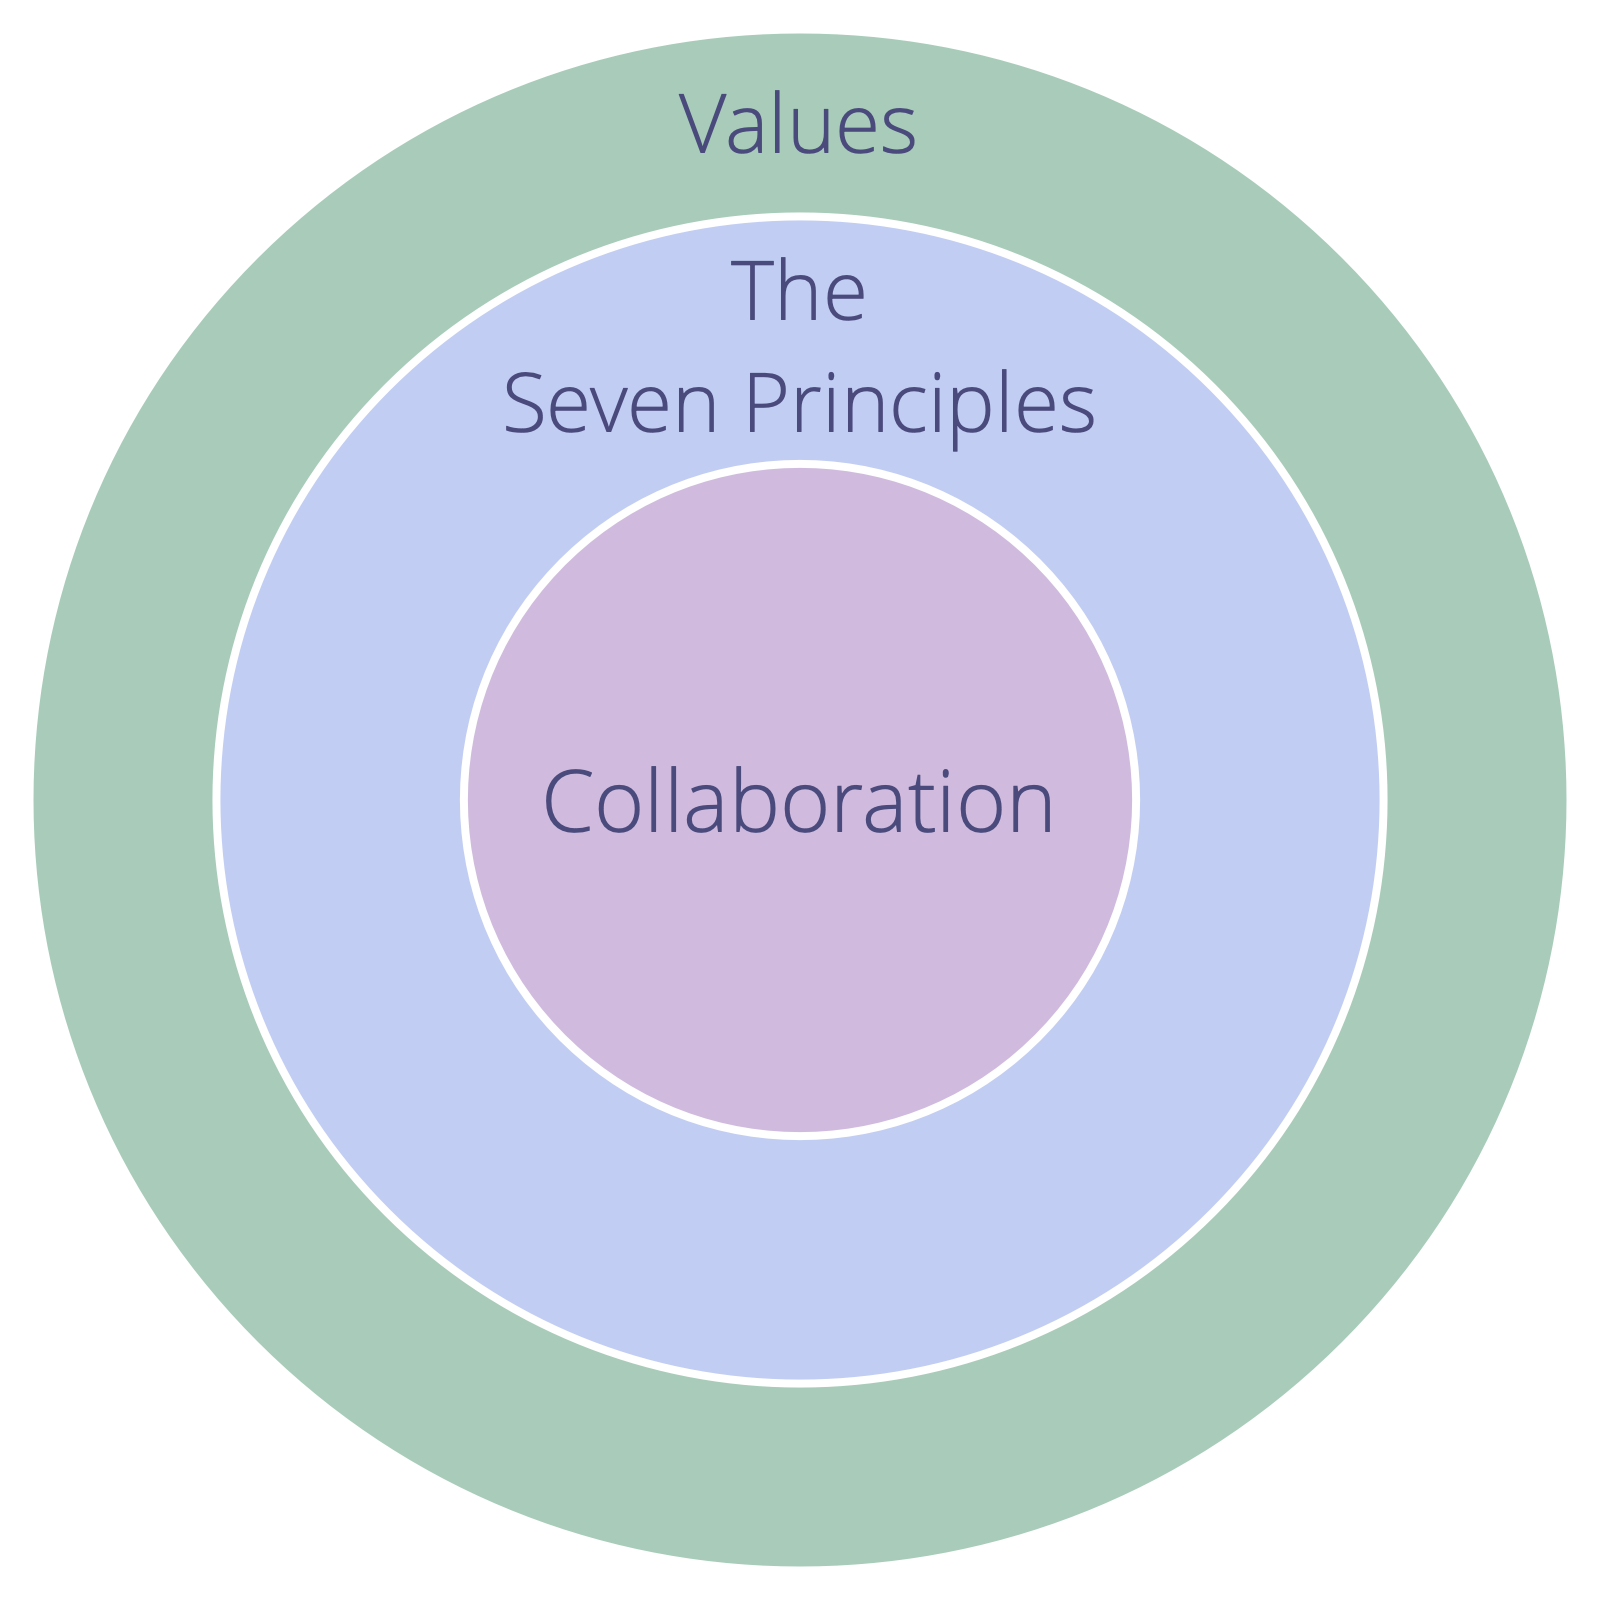 An organization's values need to embrace the Seven Principles